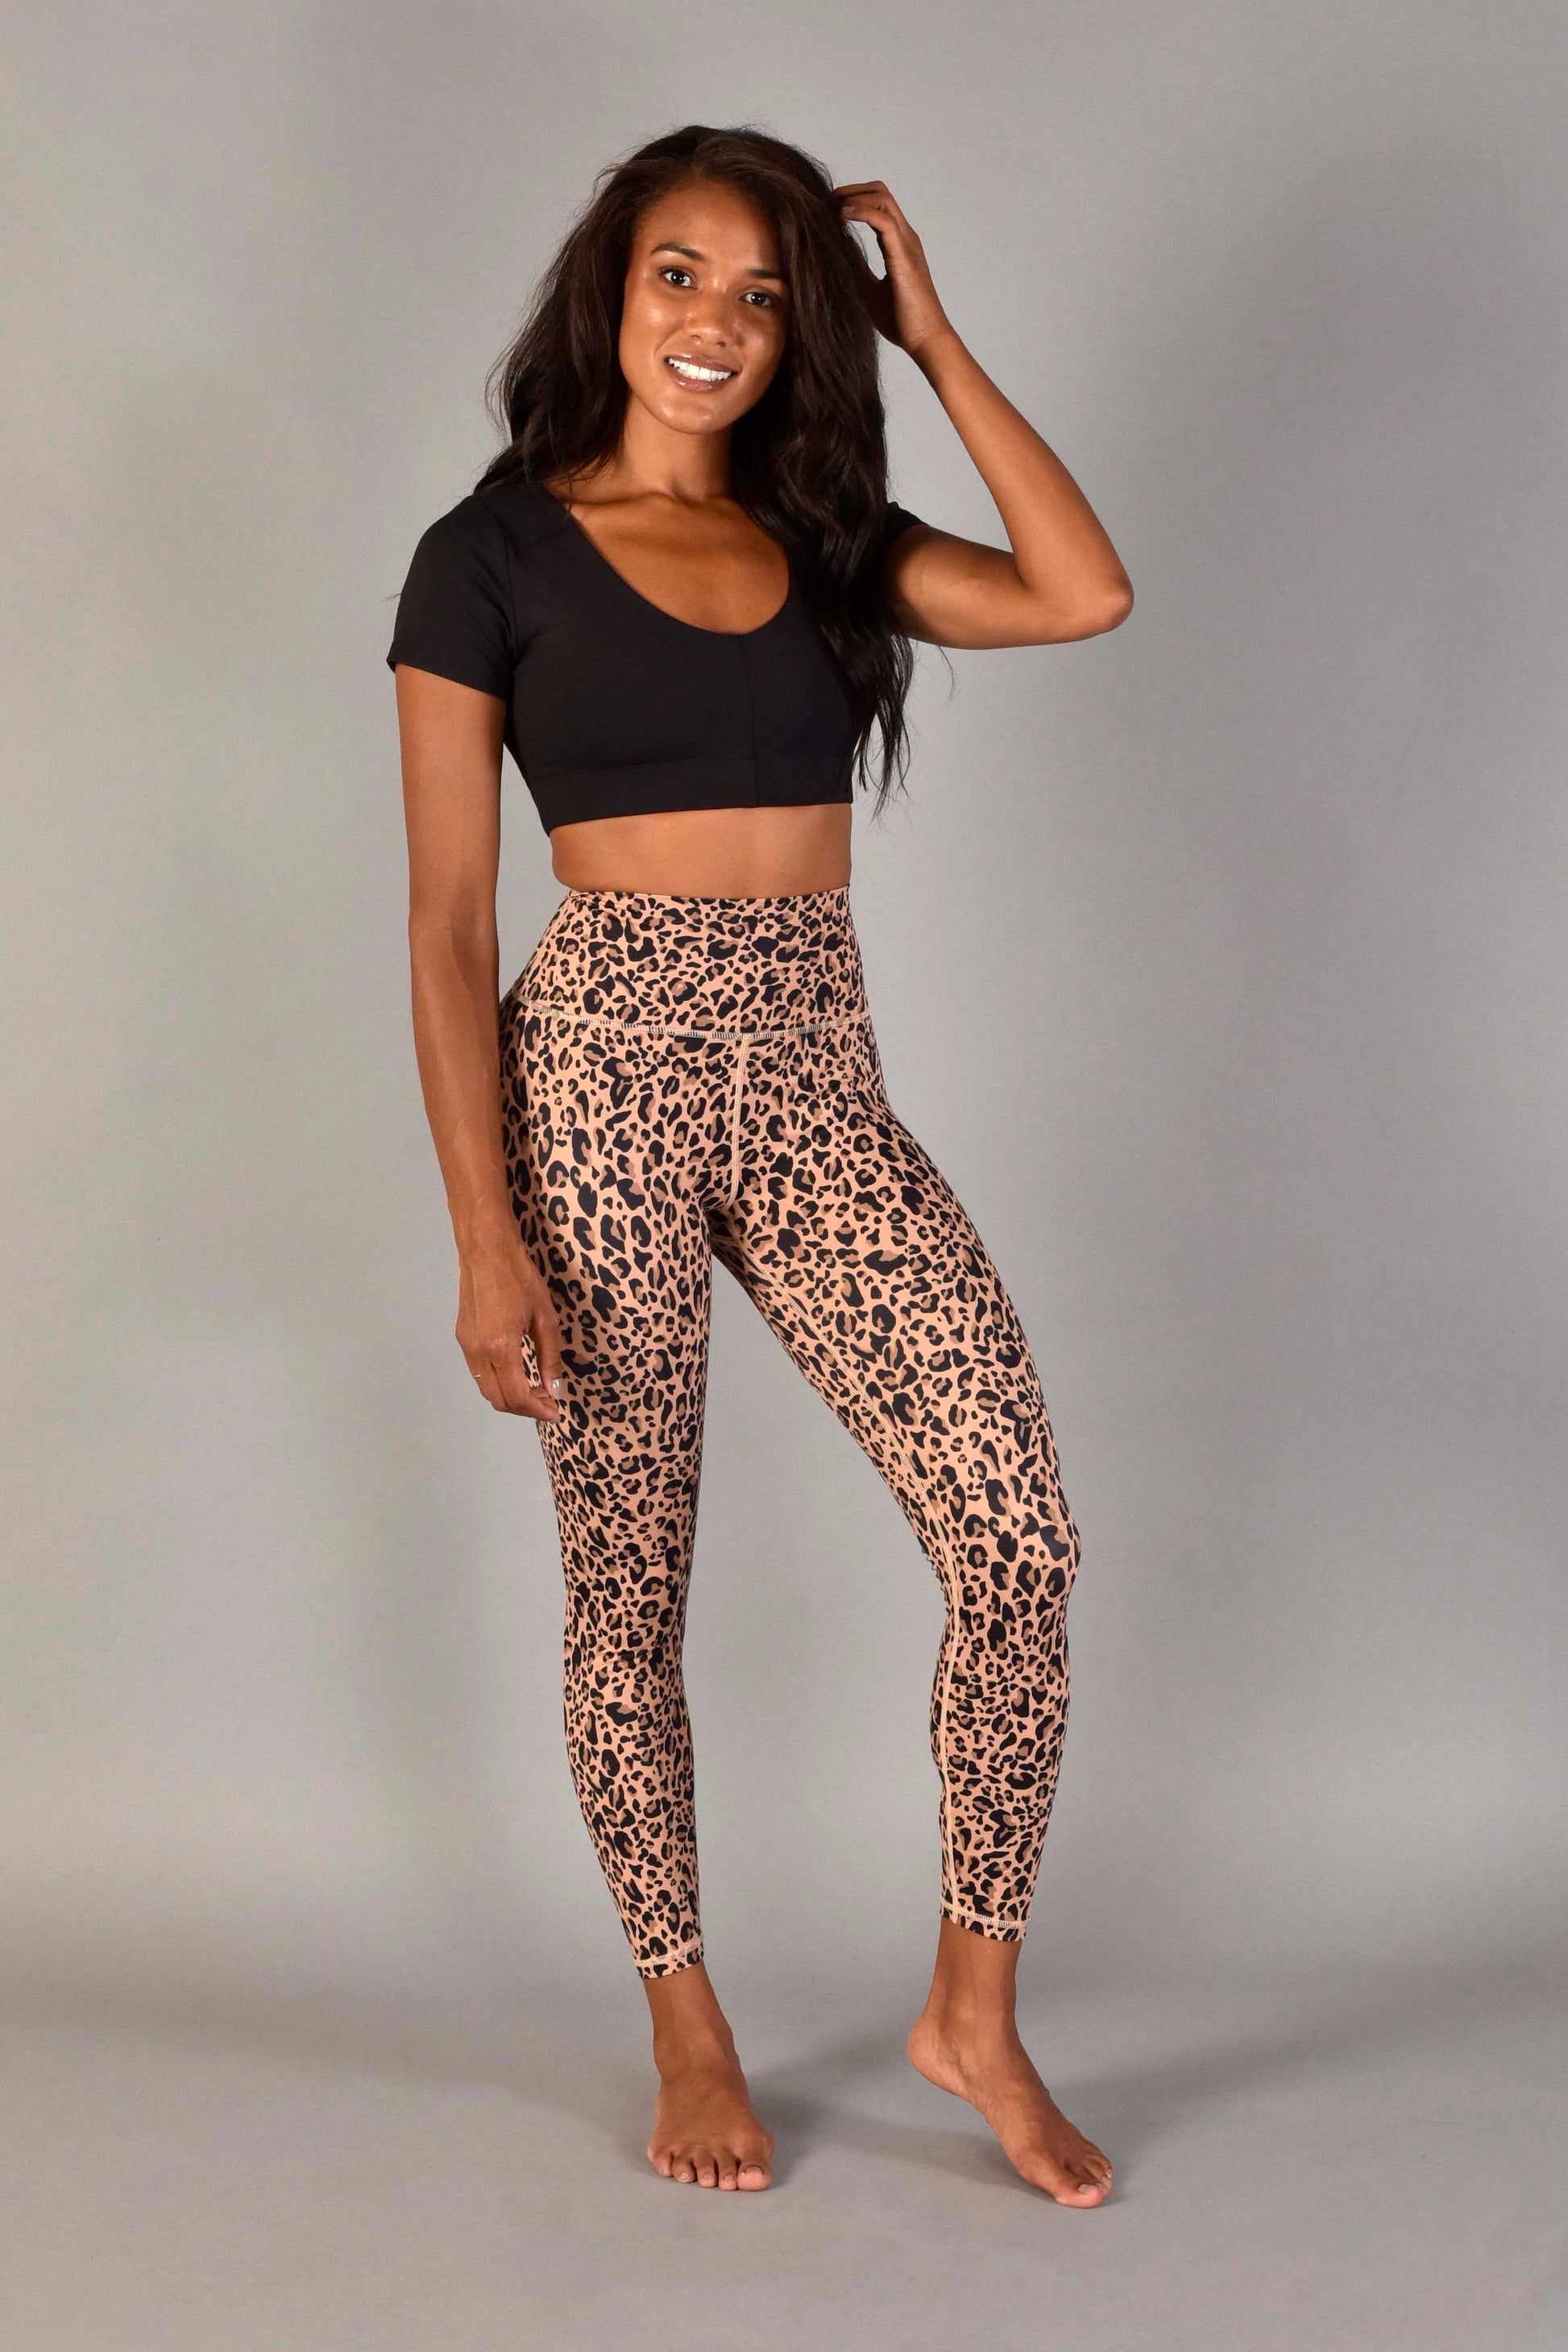 WEAR LOVE MORE Sustainable and Supportive Sports Bras.  Audrey Reversible Sports Top in Recycled Matte Black Core Compression.  V-neck Front View.  Paired with Nude Leopard Legging.